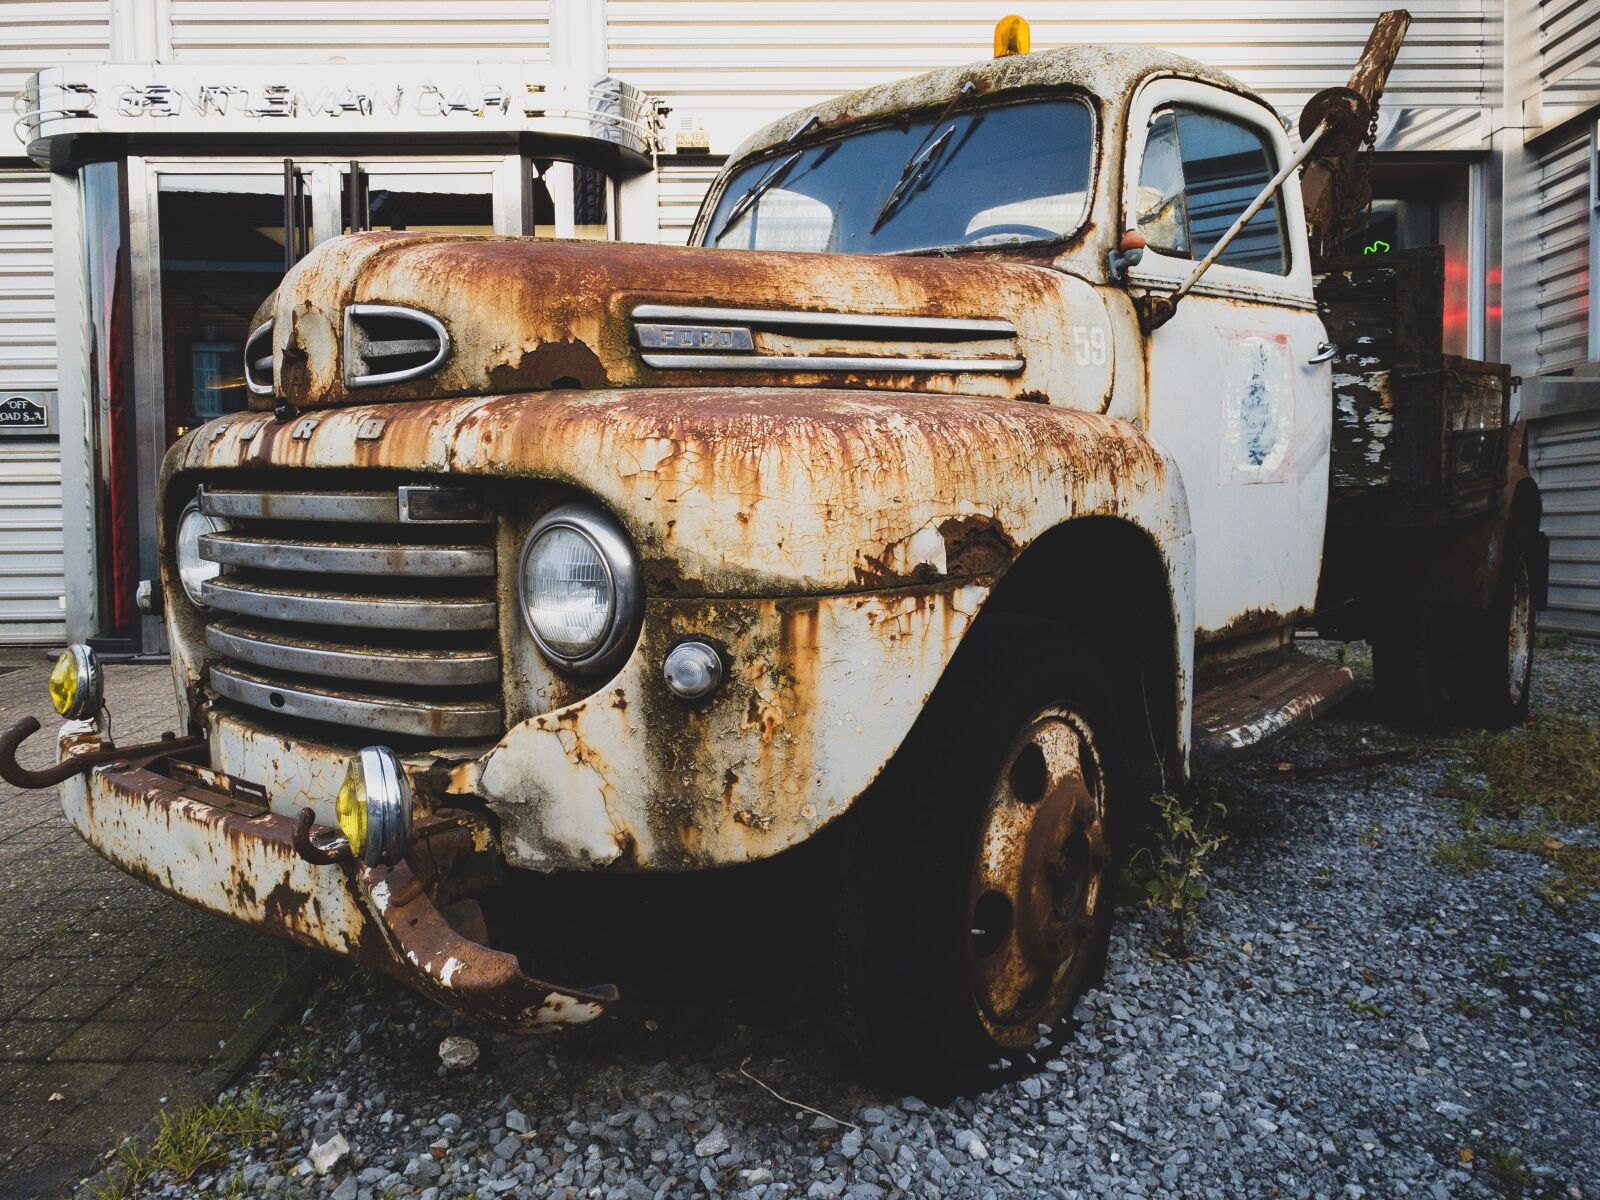 Apple iPhone XS Max + iPhone XS Max back camera 4.25mm f/1.8 sample photo. Oldtimer, truck, ford photography